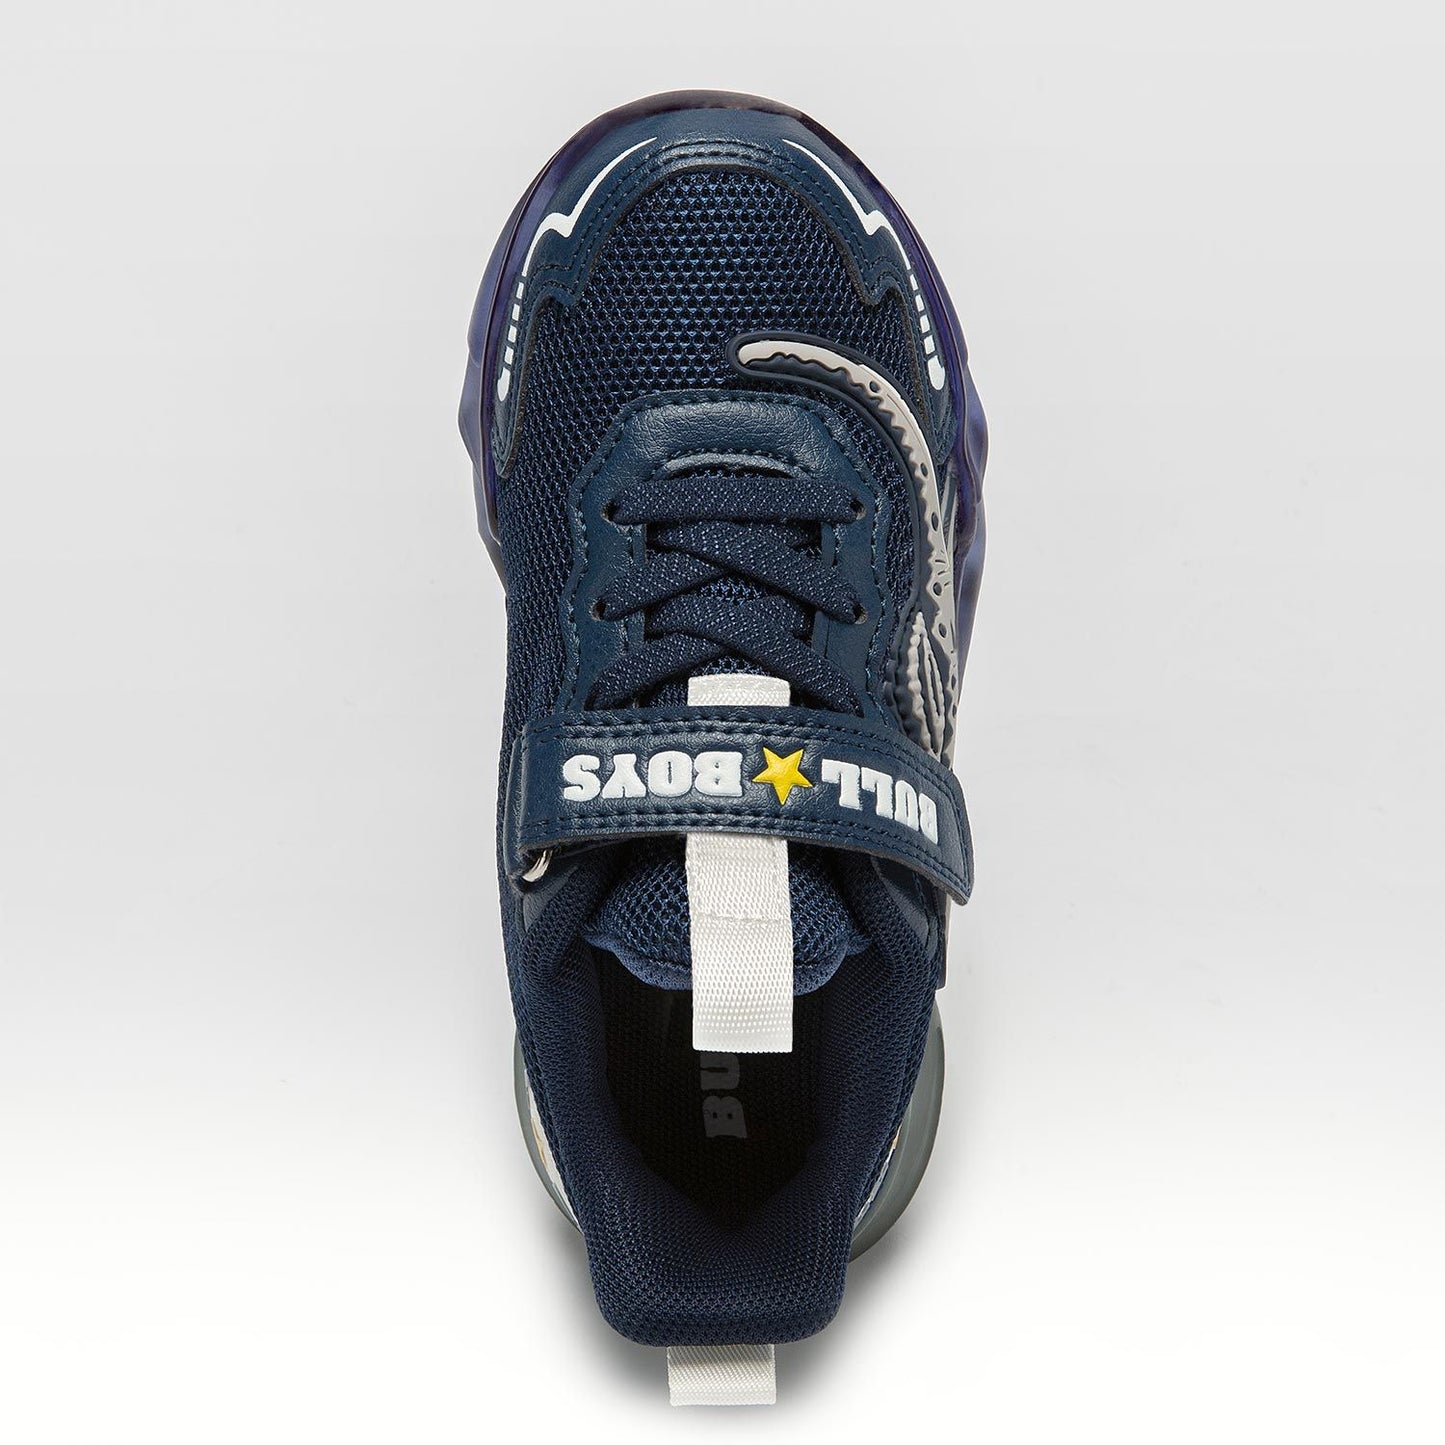 A boys trainer by Bull Boys, style Spinosauro, in navy blue with grey dinosaur in 3D and flashing sole. Velcro and elastic faux lace fastening. Top view.